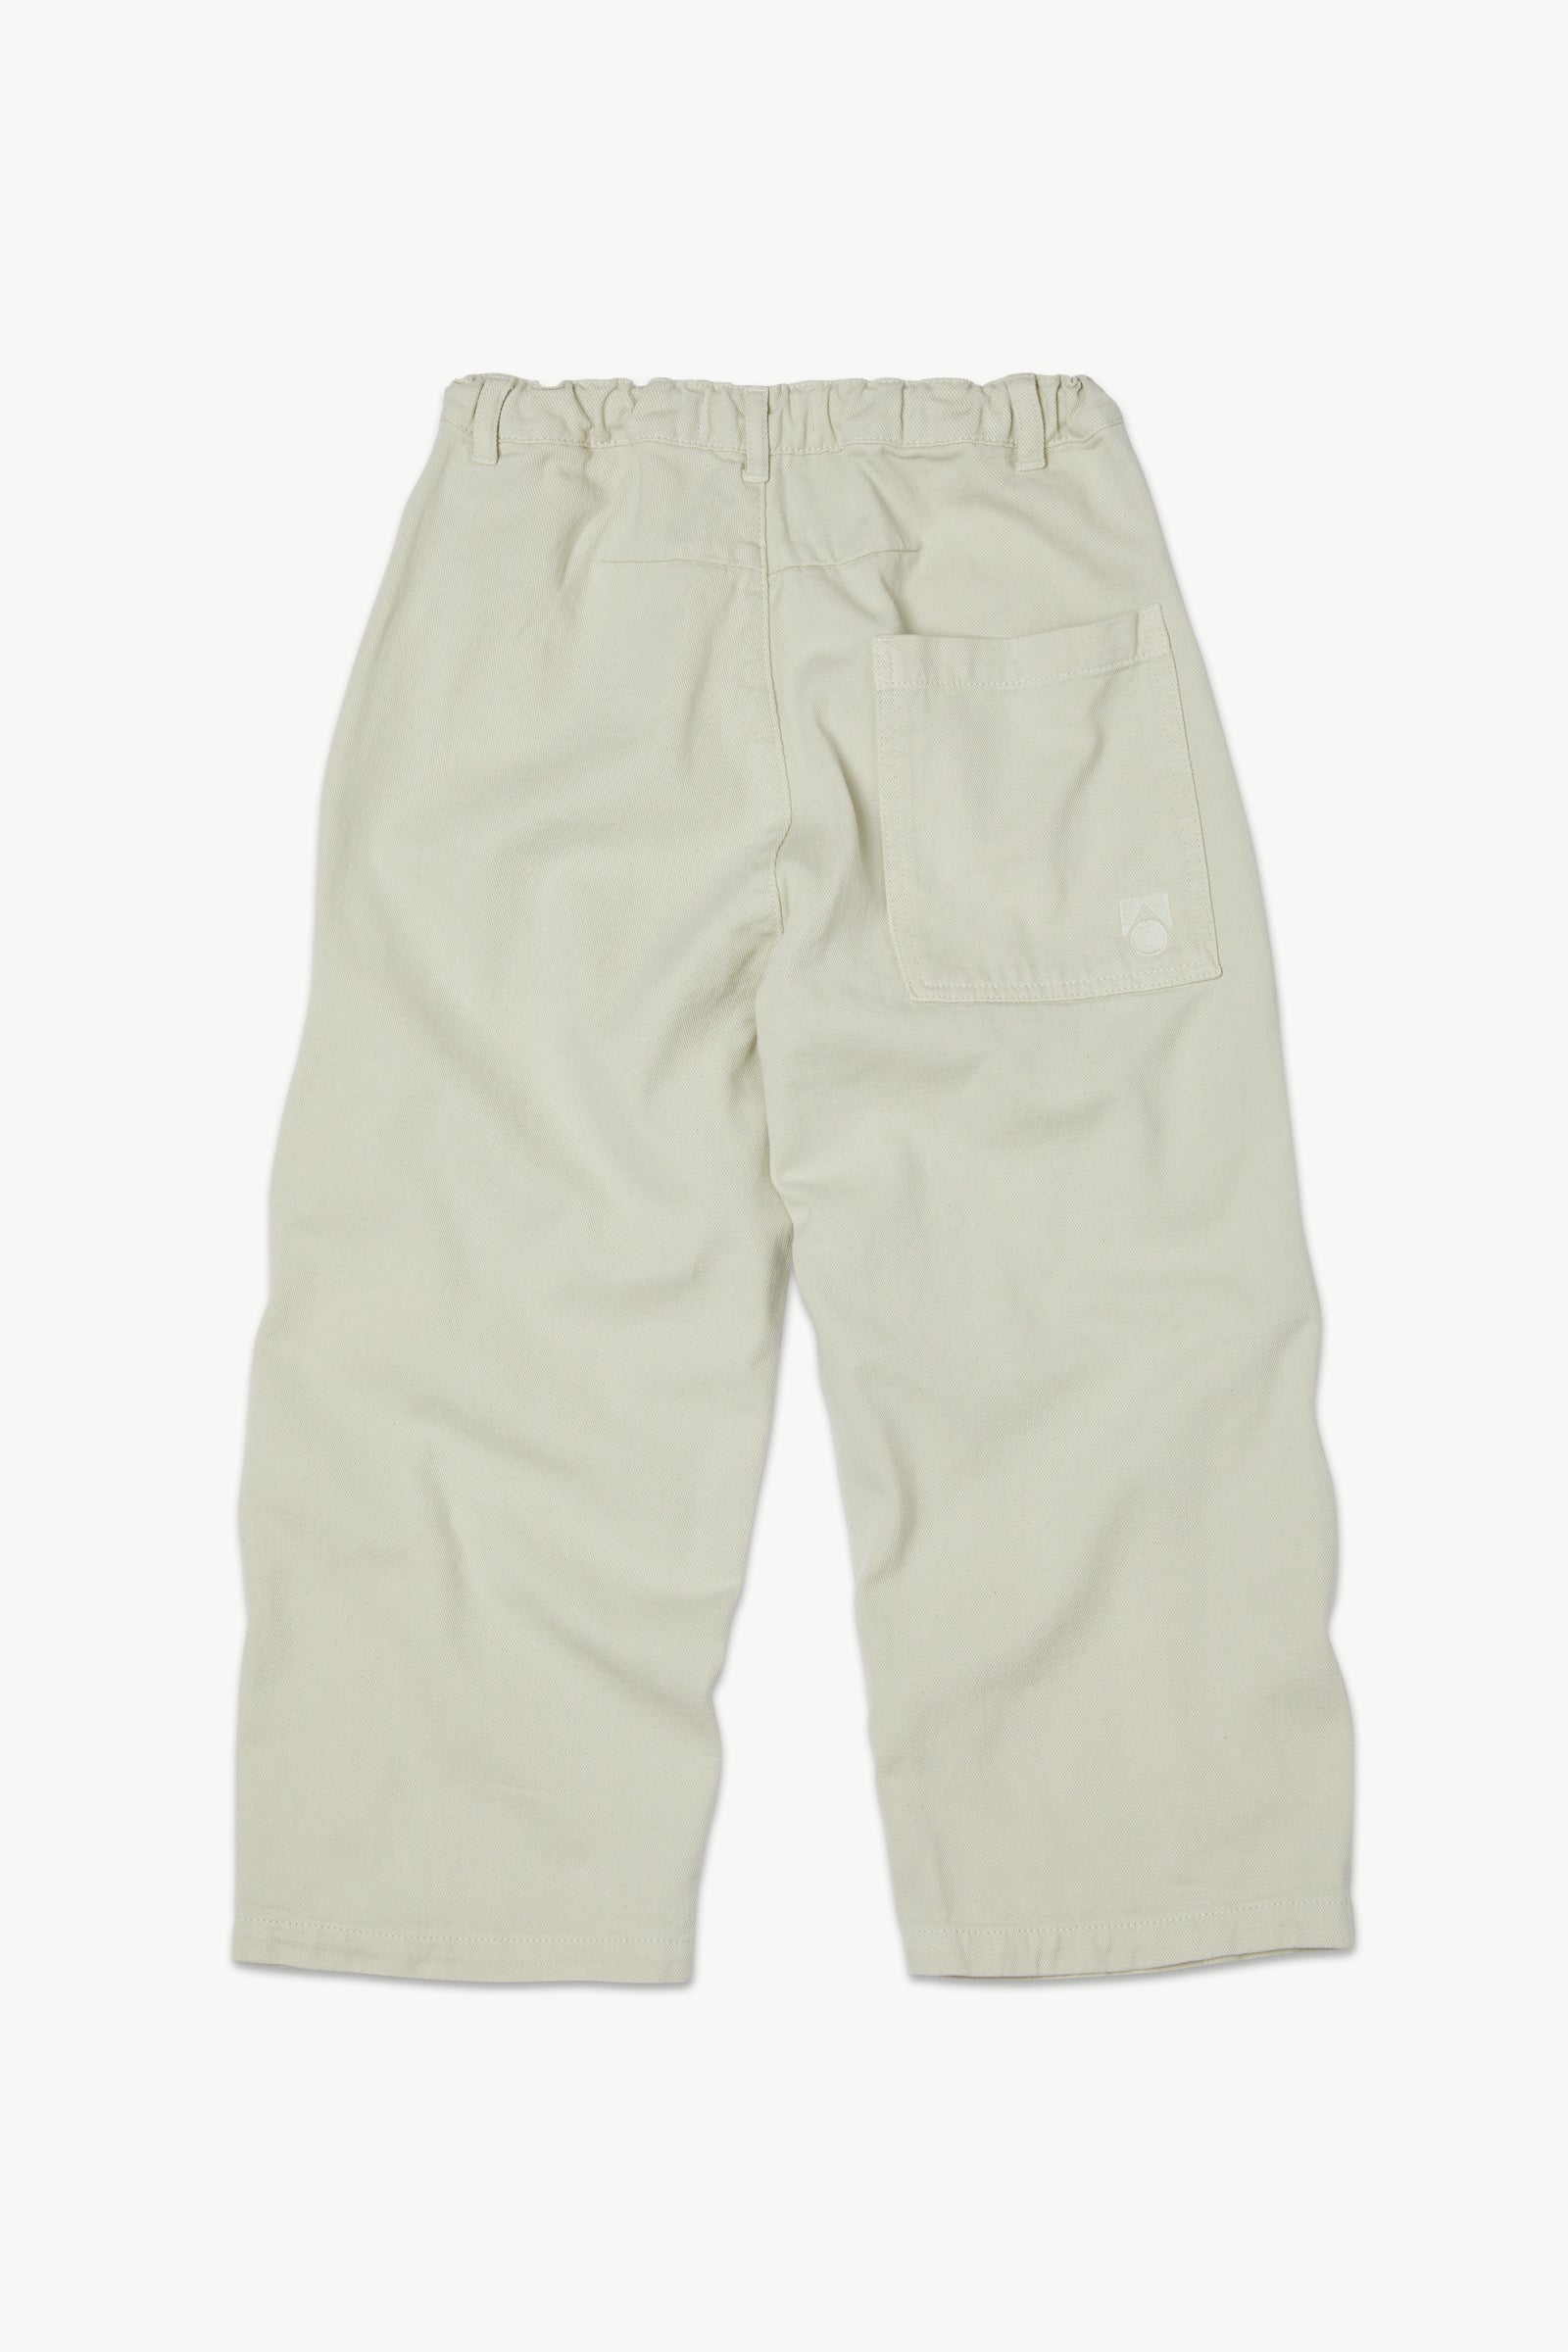 Main Story - wide pant - oat twill